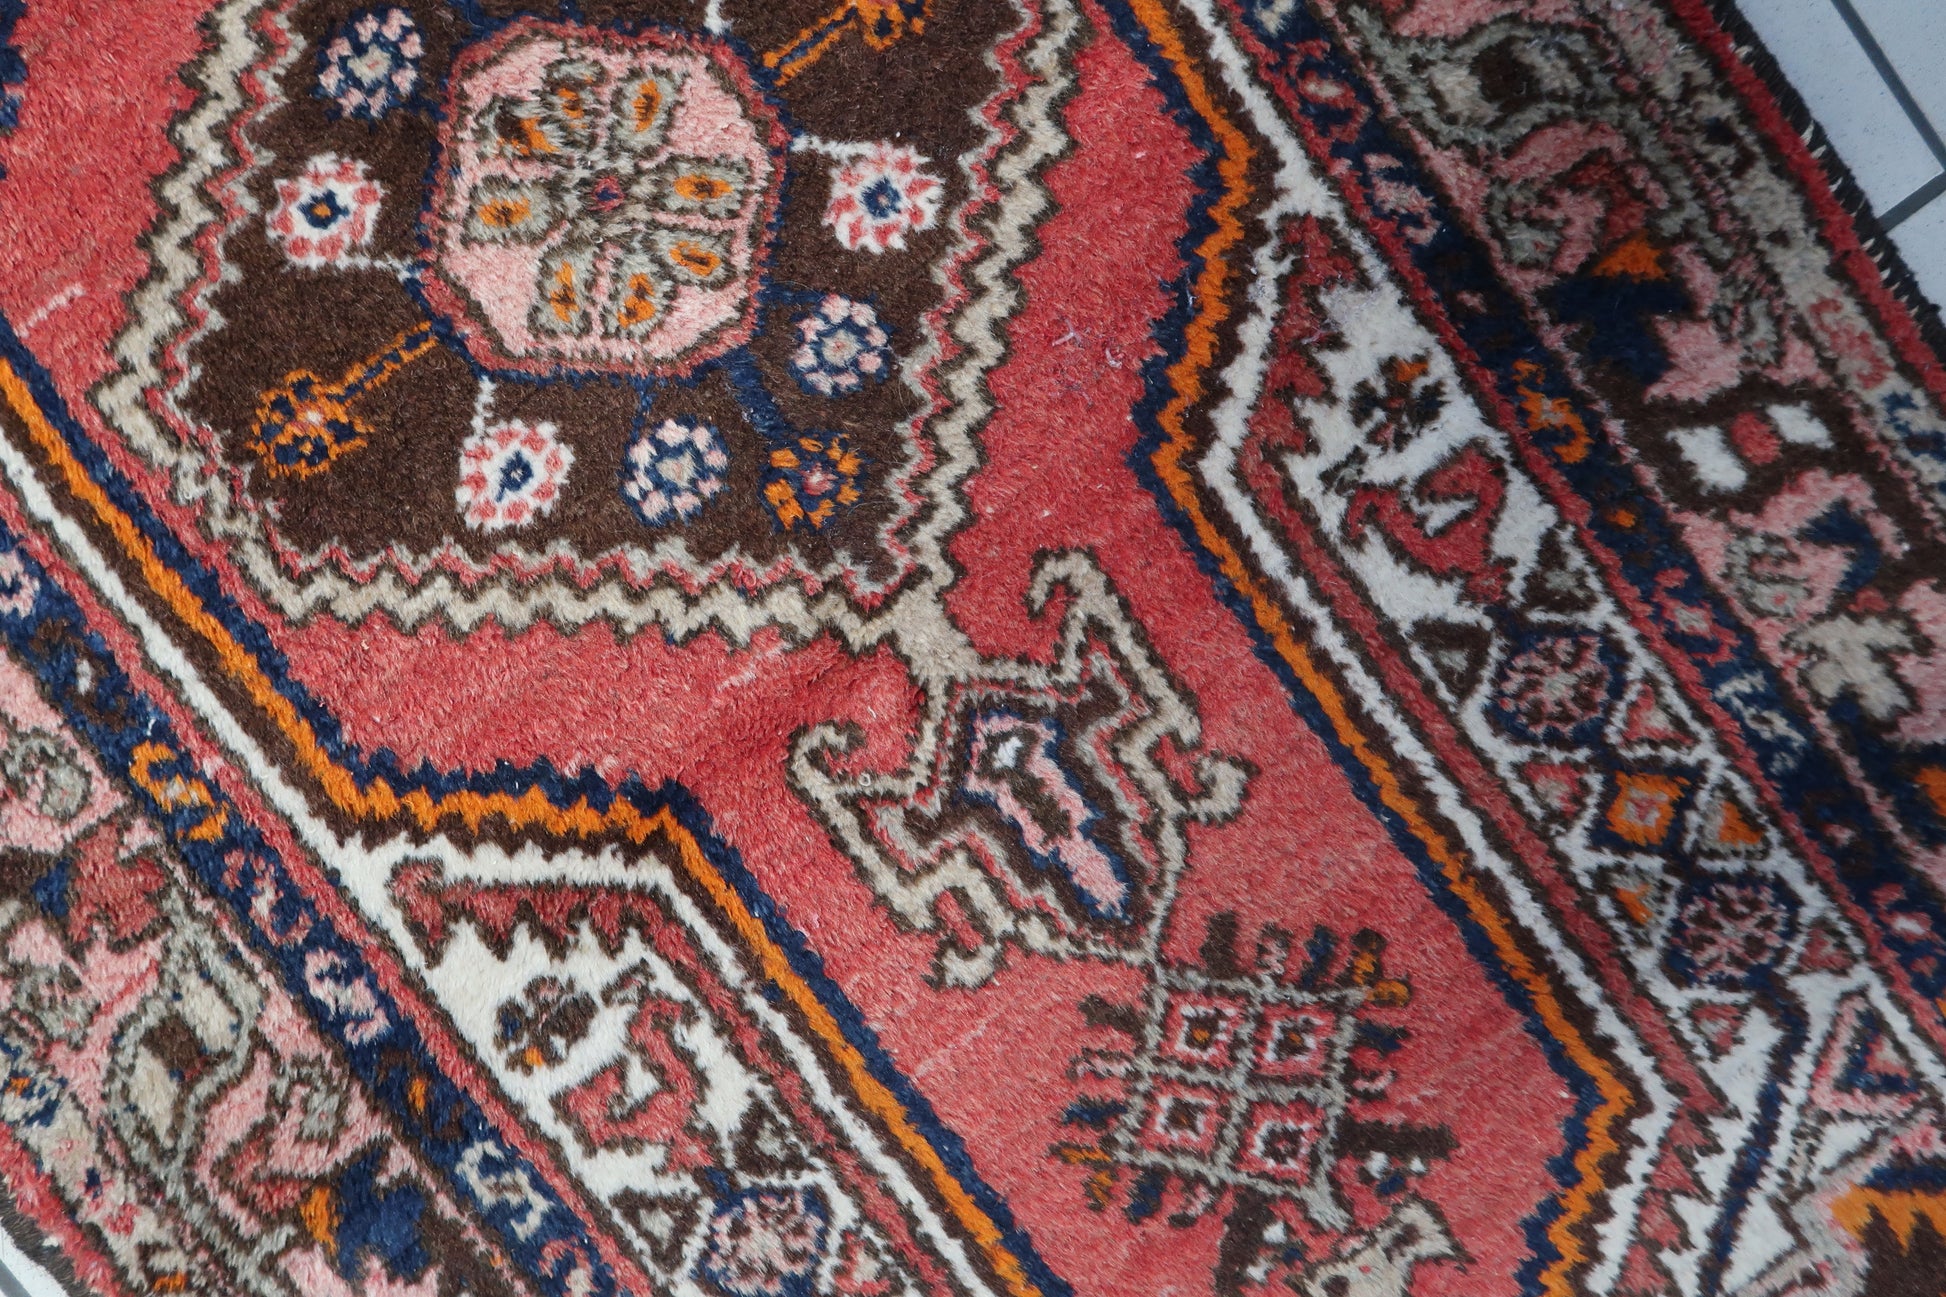 Close-up of the rich chocolate brown background and traditional design elements on the rug